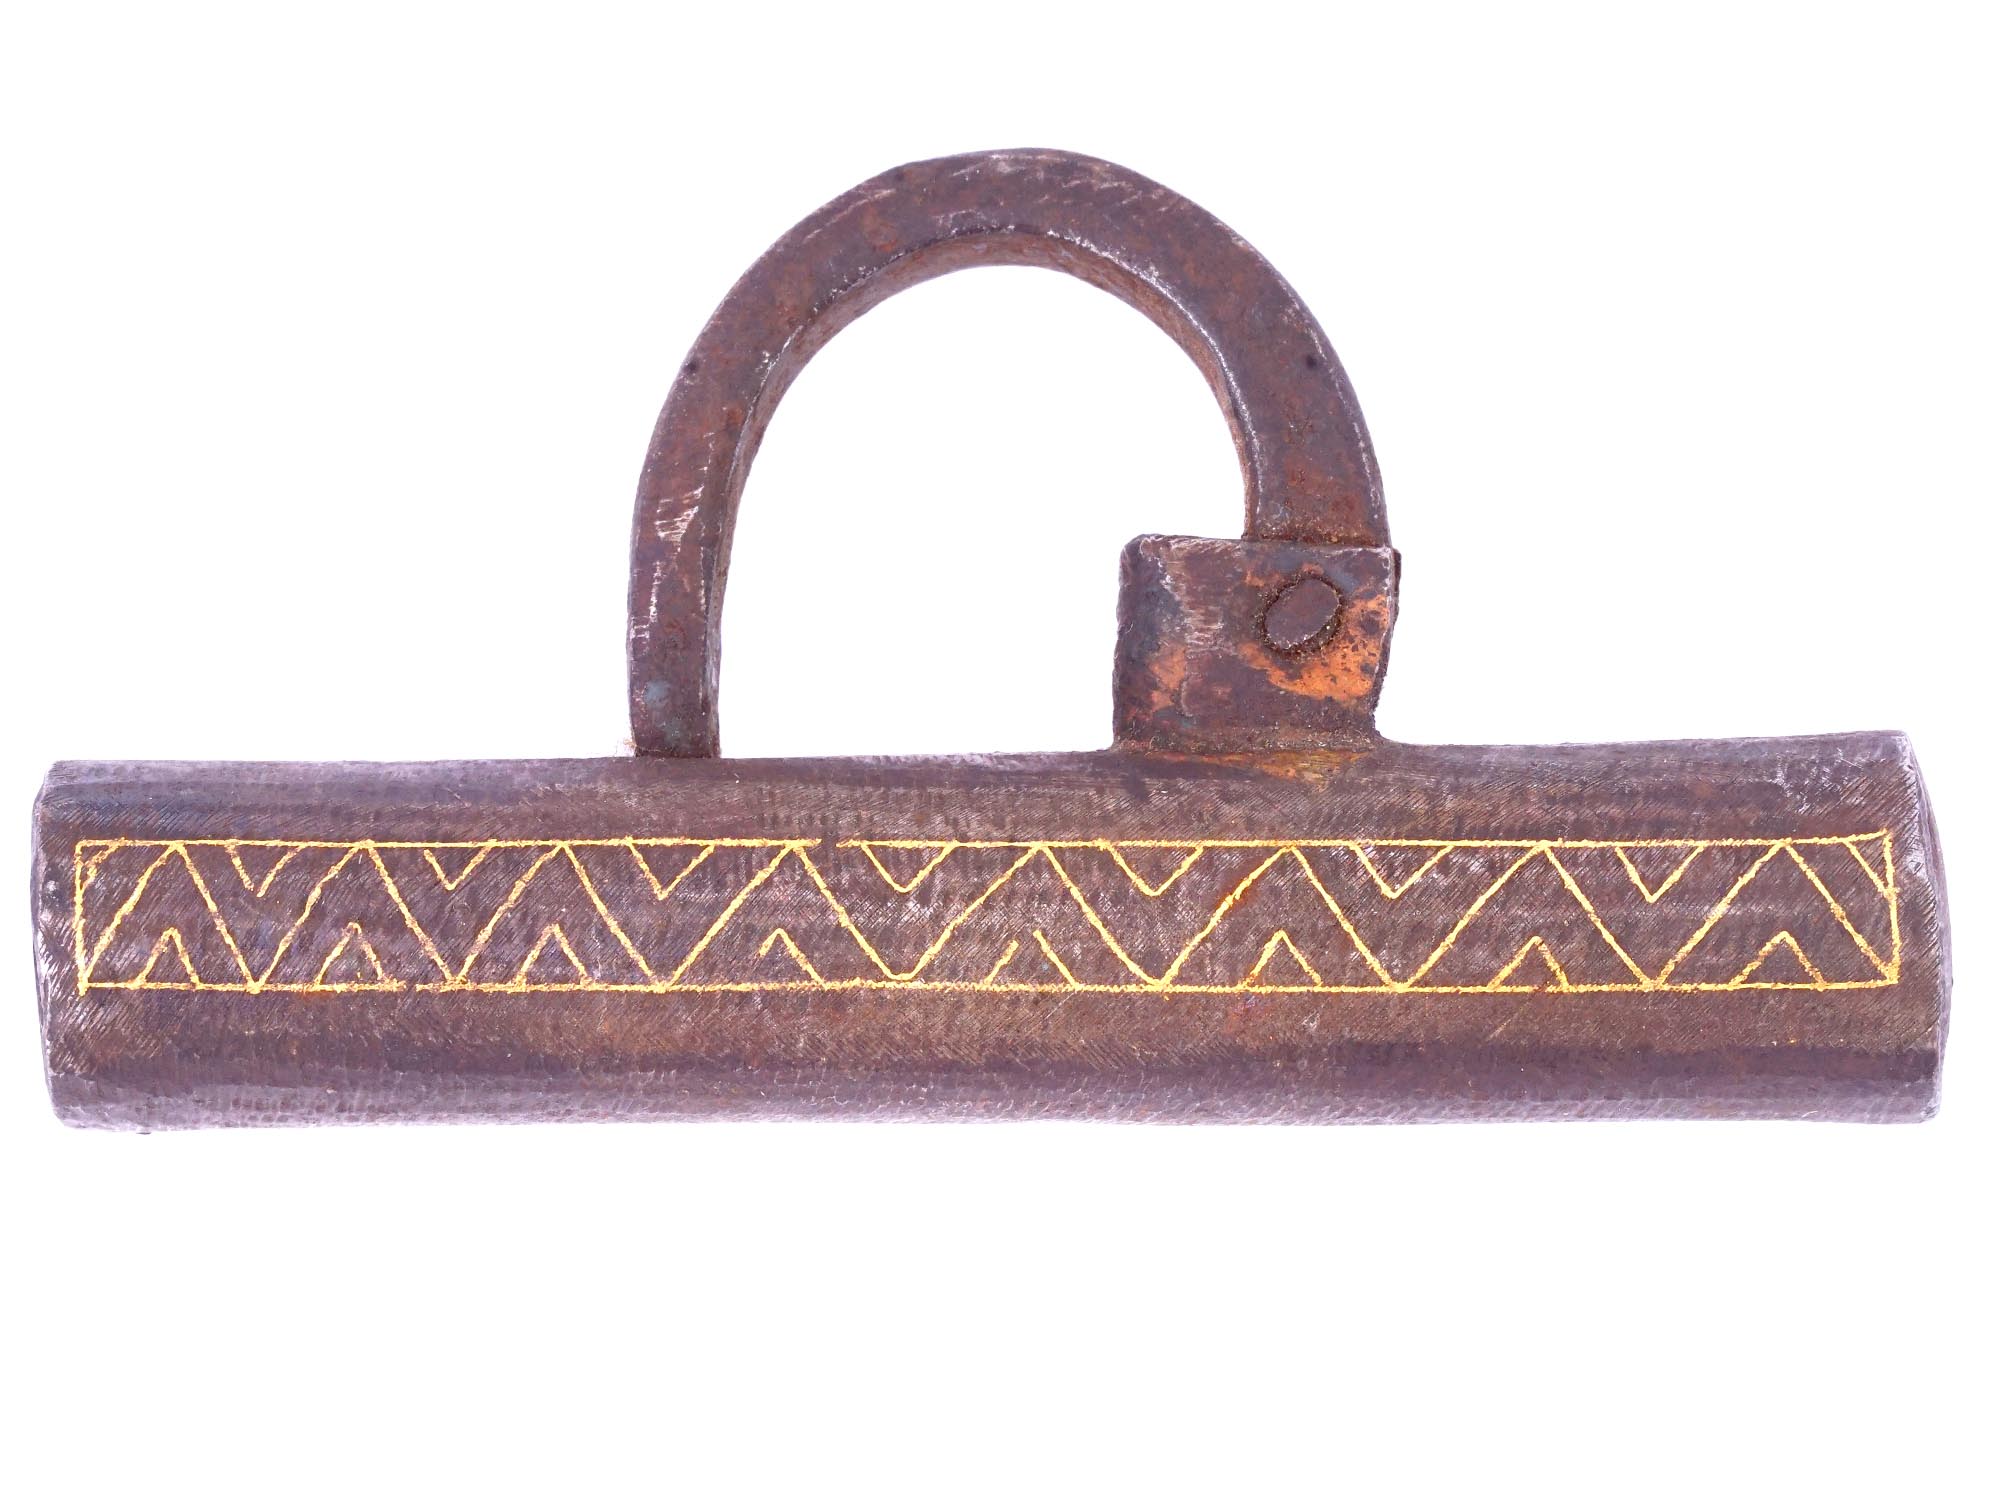 ANTIQUE ISLAMIC PADLOCK WITH GEOMETRICAL PATTERNS PIC-1